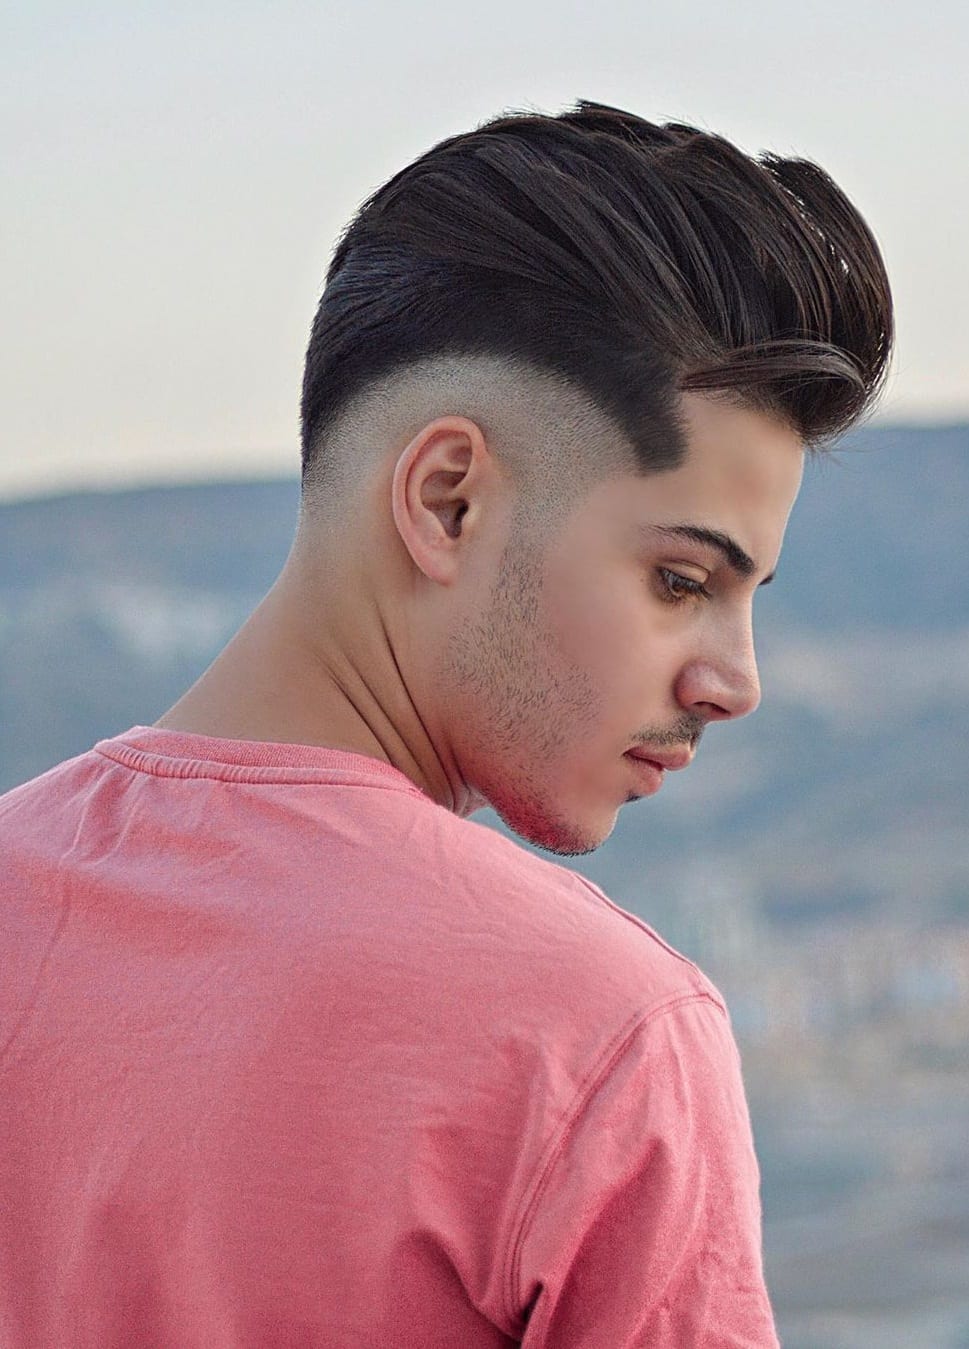 Haircuts for Men to try in 2020